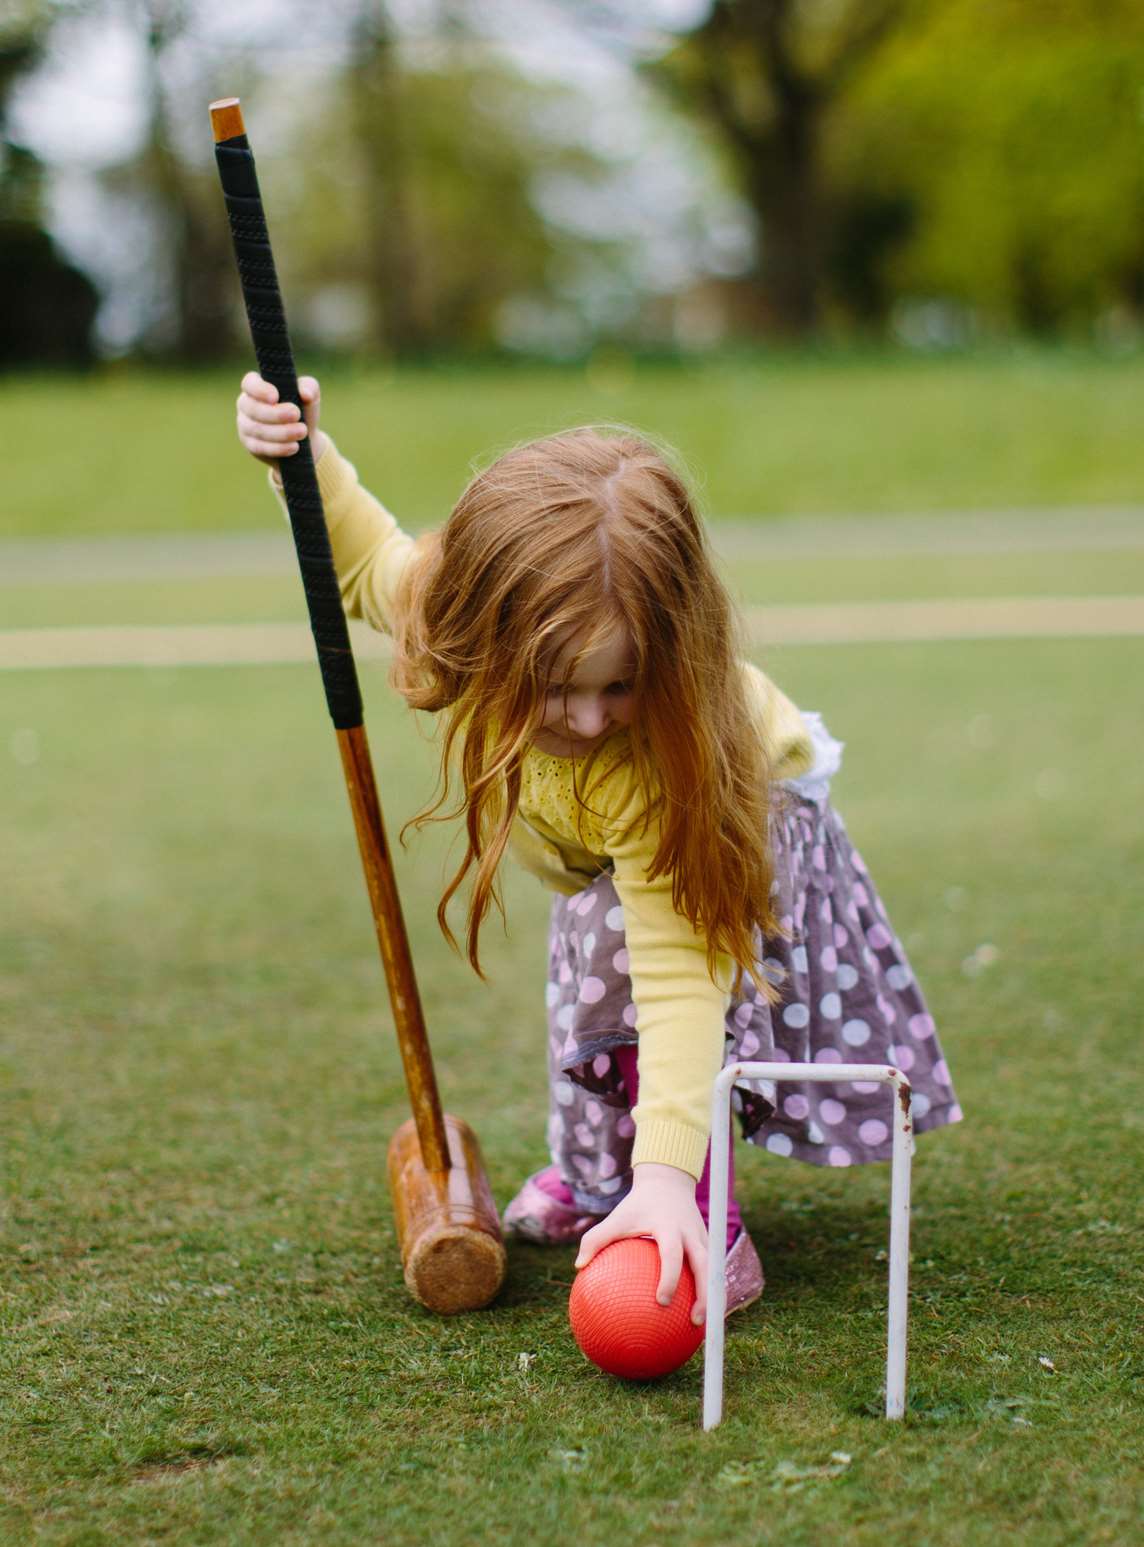 Image: A young child playing croquet